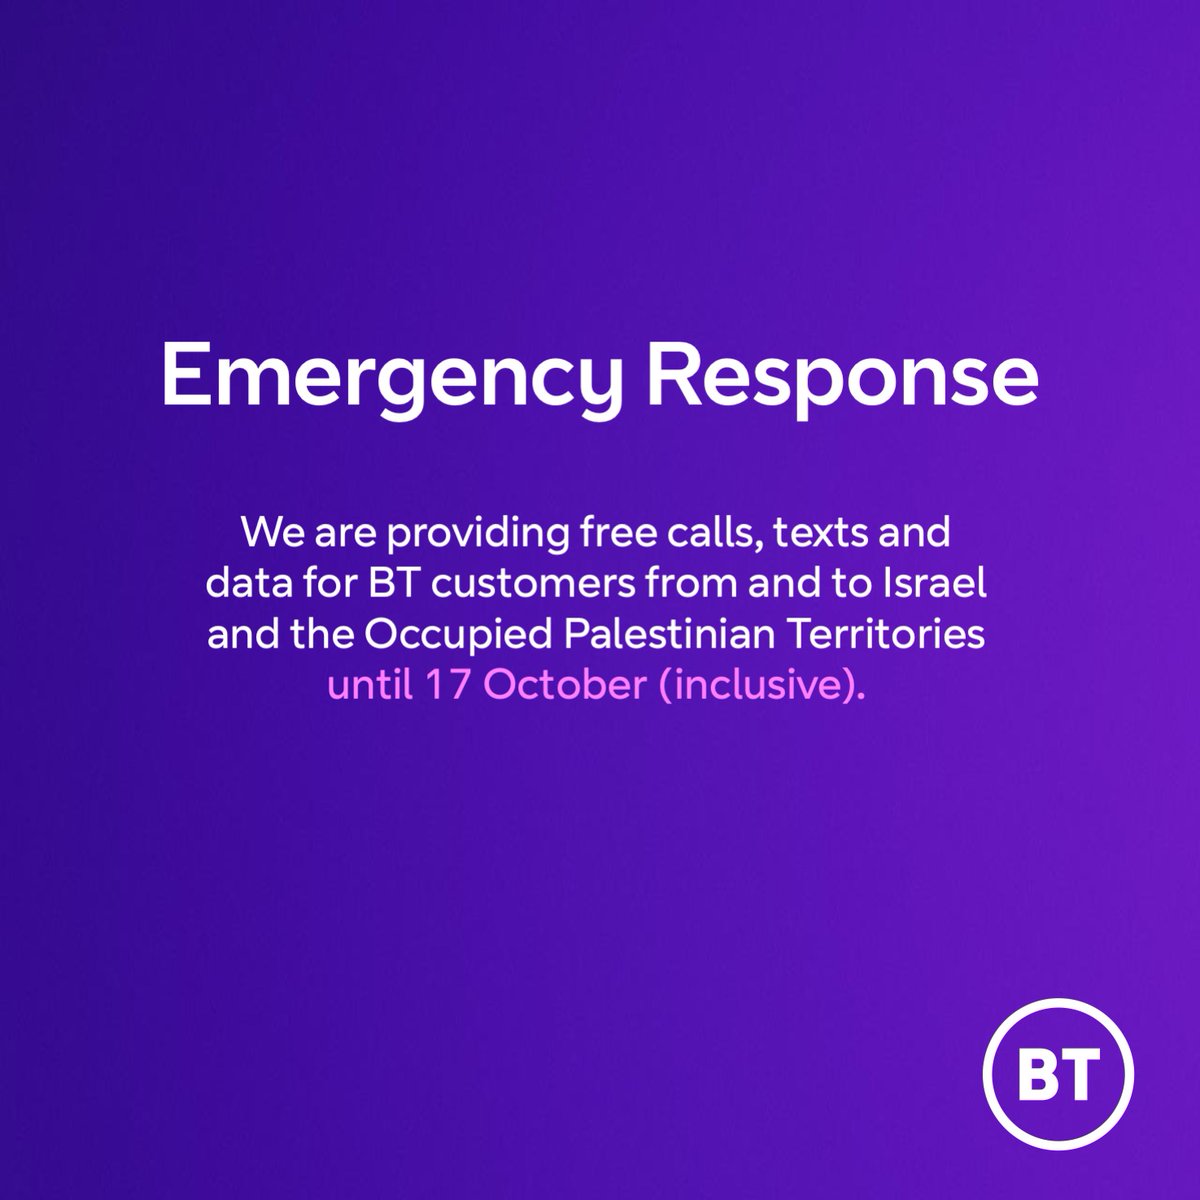 We are providing free calls, texts and data for BT customers from and to Israel and the Occupied Palestinian Territories until 17 October (inclusive).